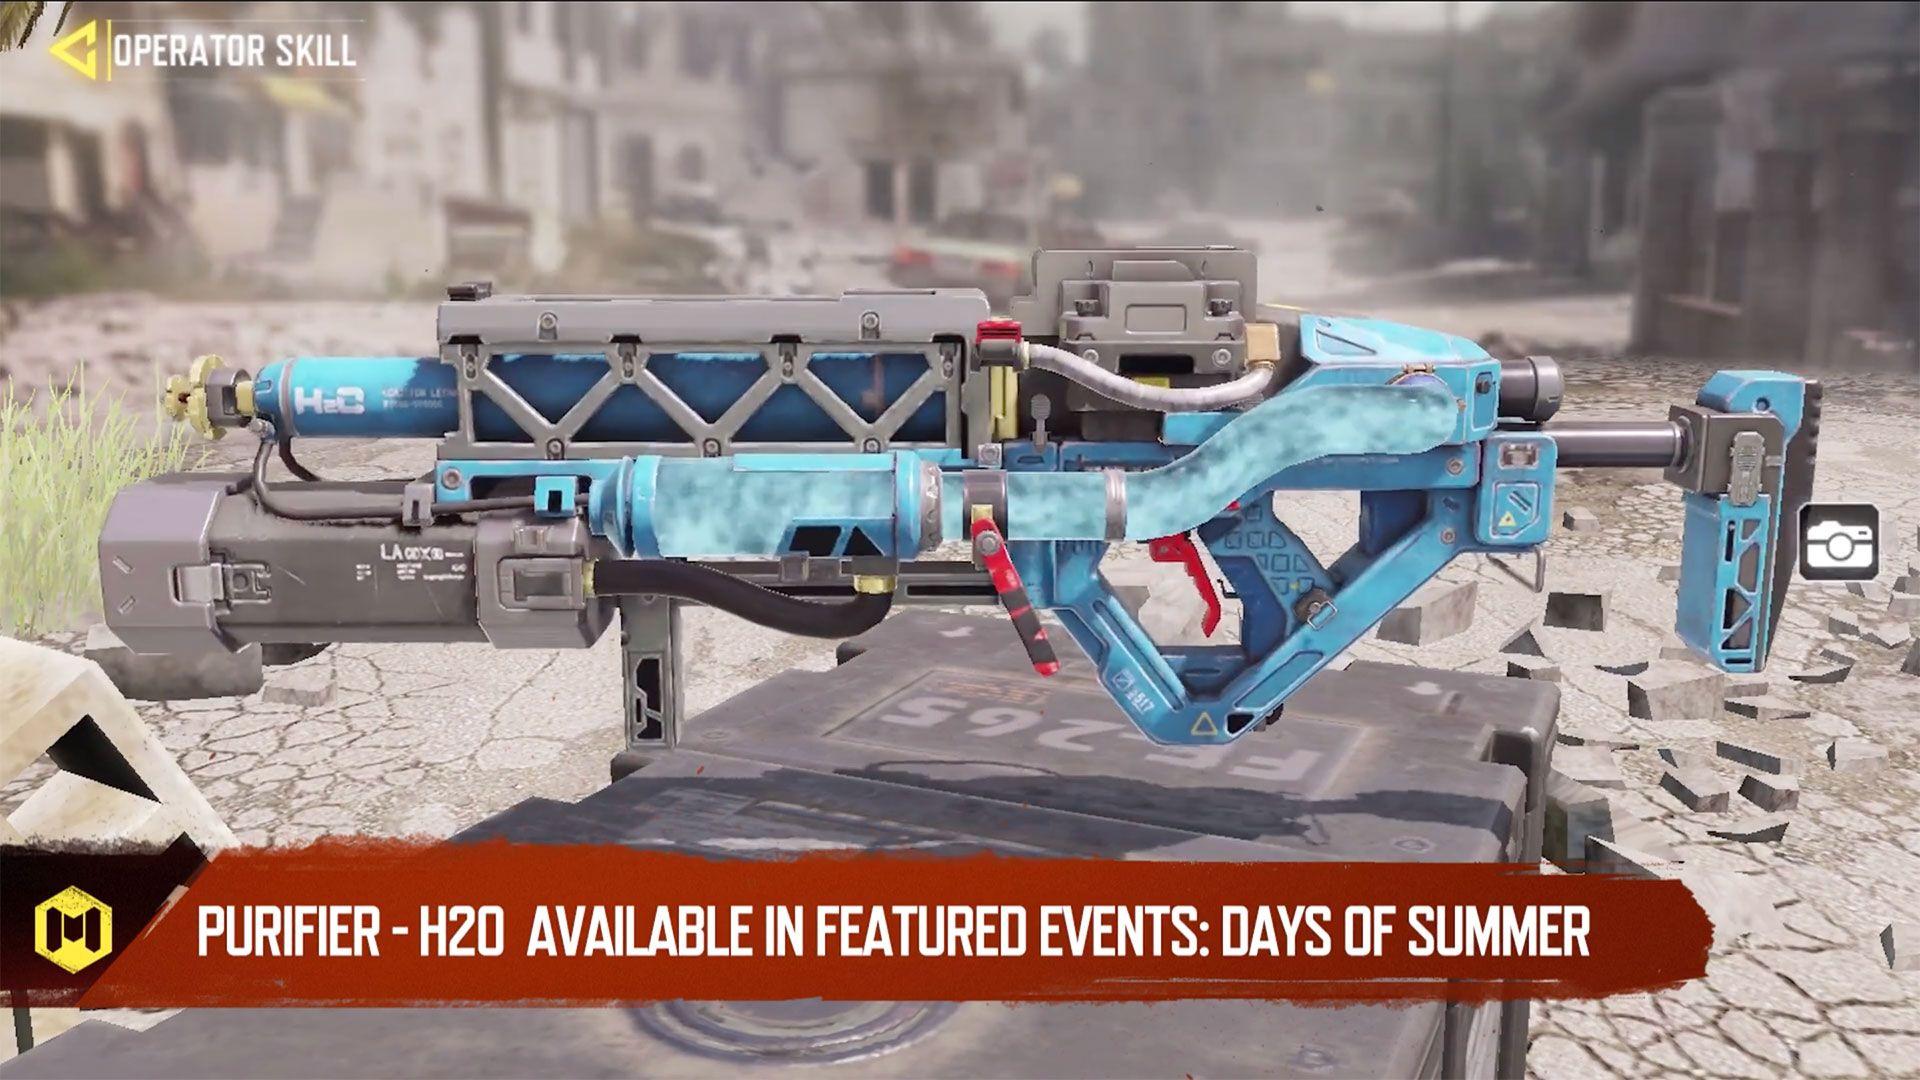 CoD Mobile skin H20 Purifier Activision Summer Days